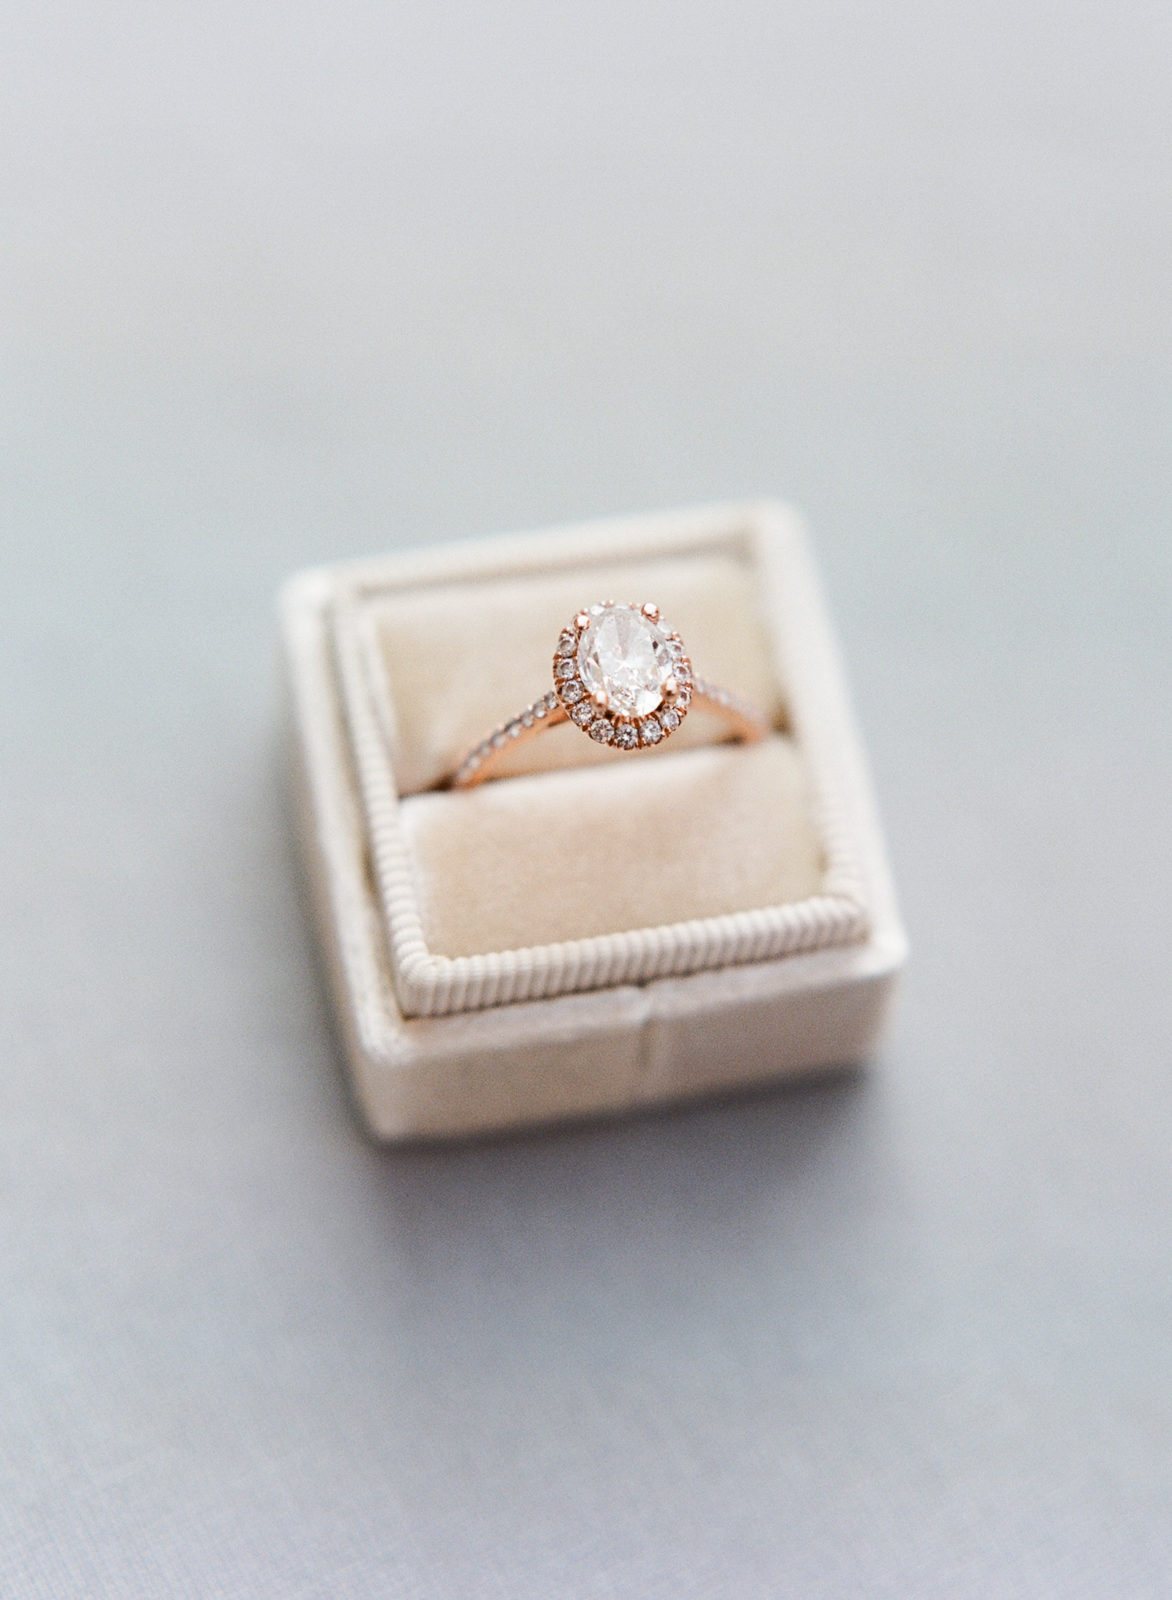 Laurel Hall Wedding Photographer | Estate Wedding Venue | Midwest Film Photographer | Molly Carr Photography | Rose Gold Engagement Ring